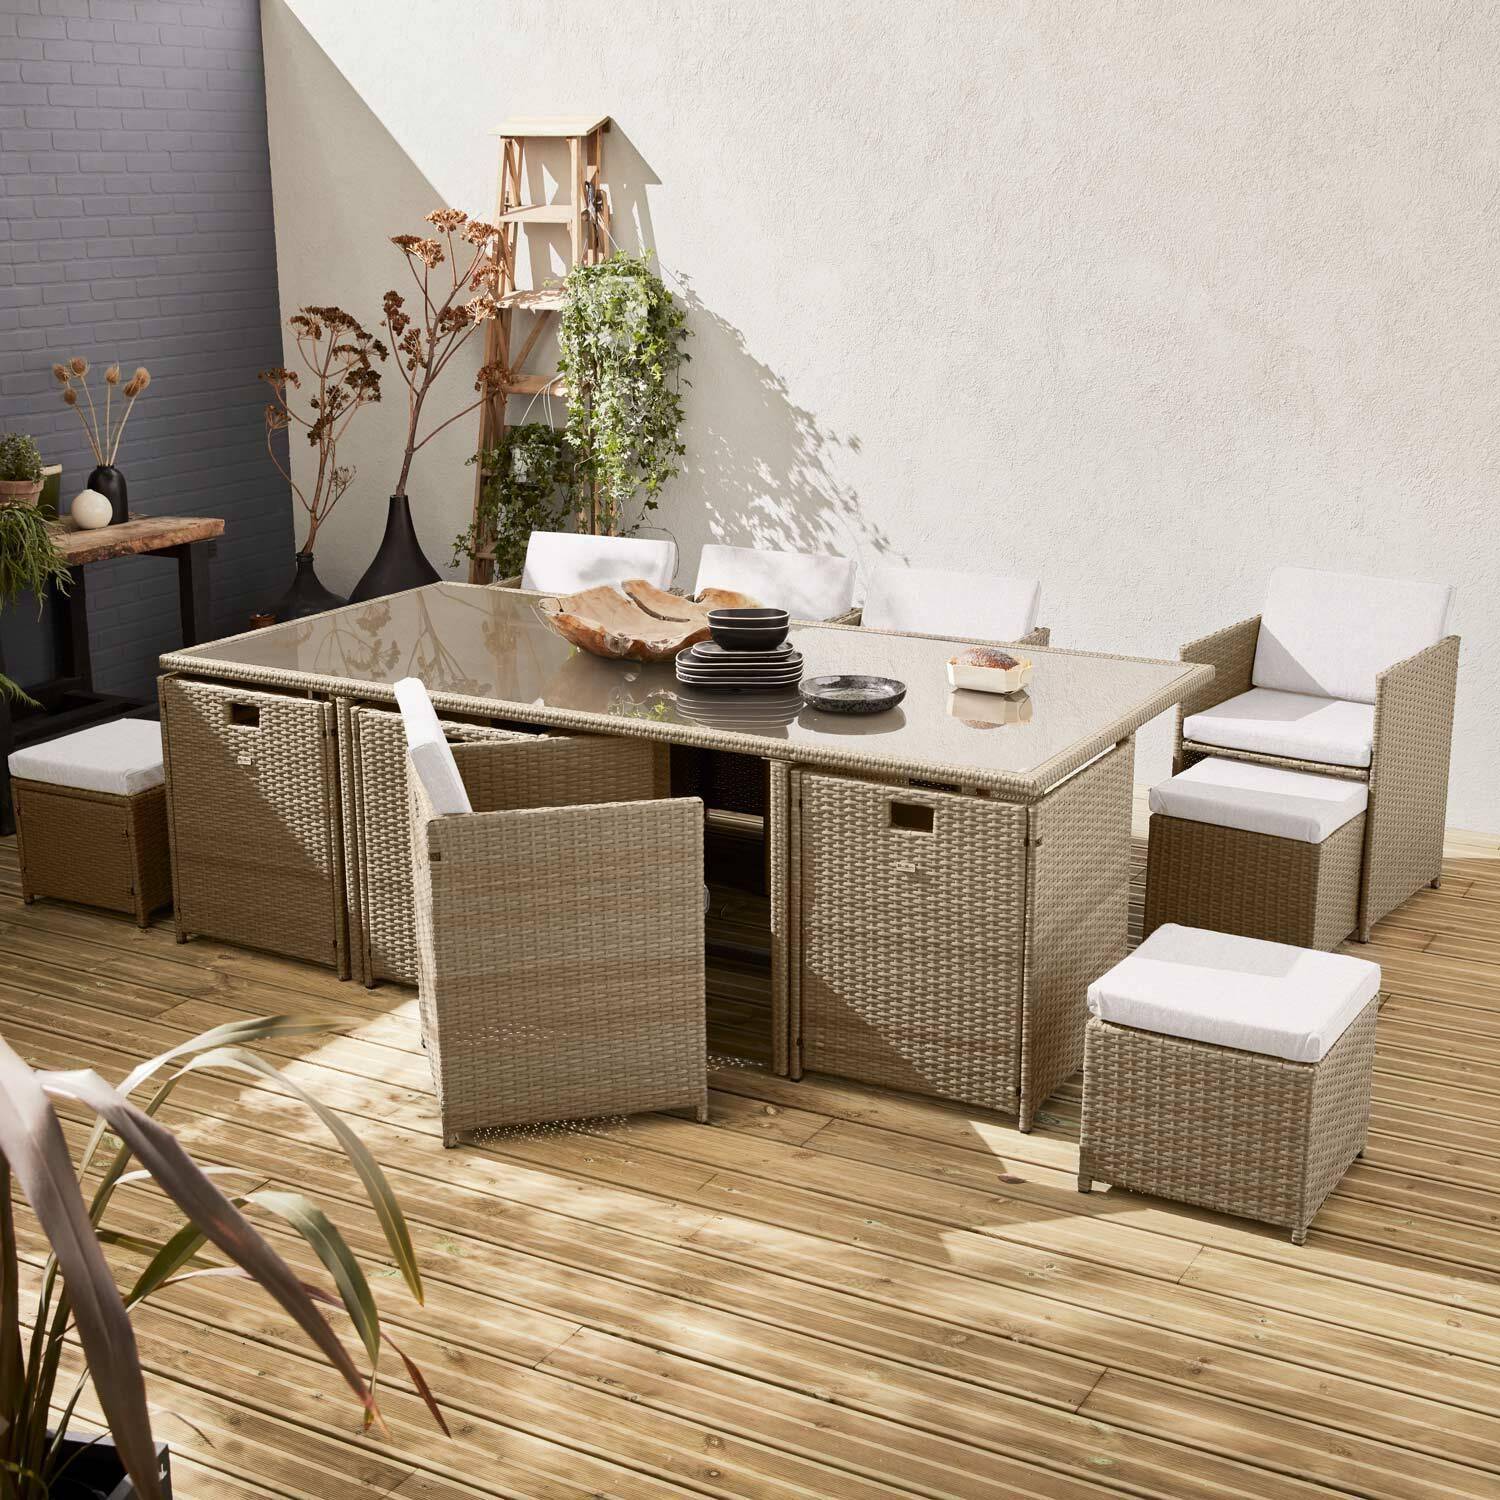 8 to 12-seater rattan cube table set - table, 8 armchairs, 4 footstools - Vabo 12 - Natural rattan, Beige cushions,sweeek,Photo1